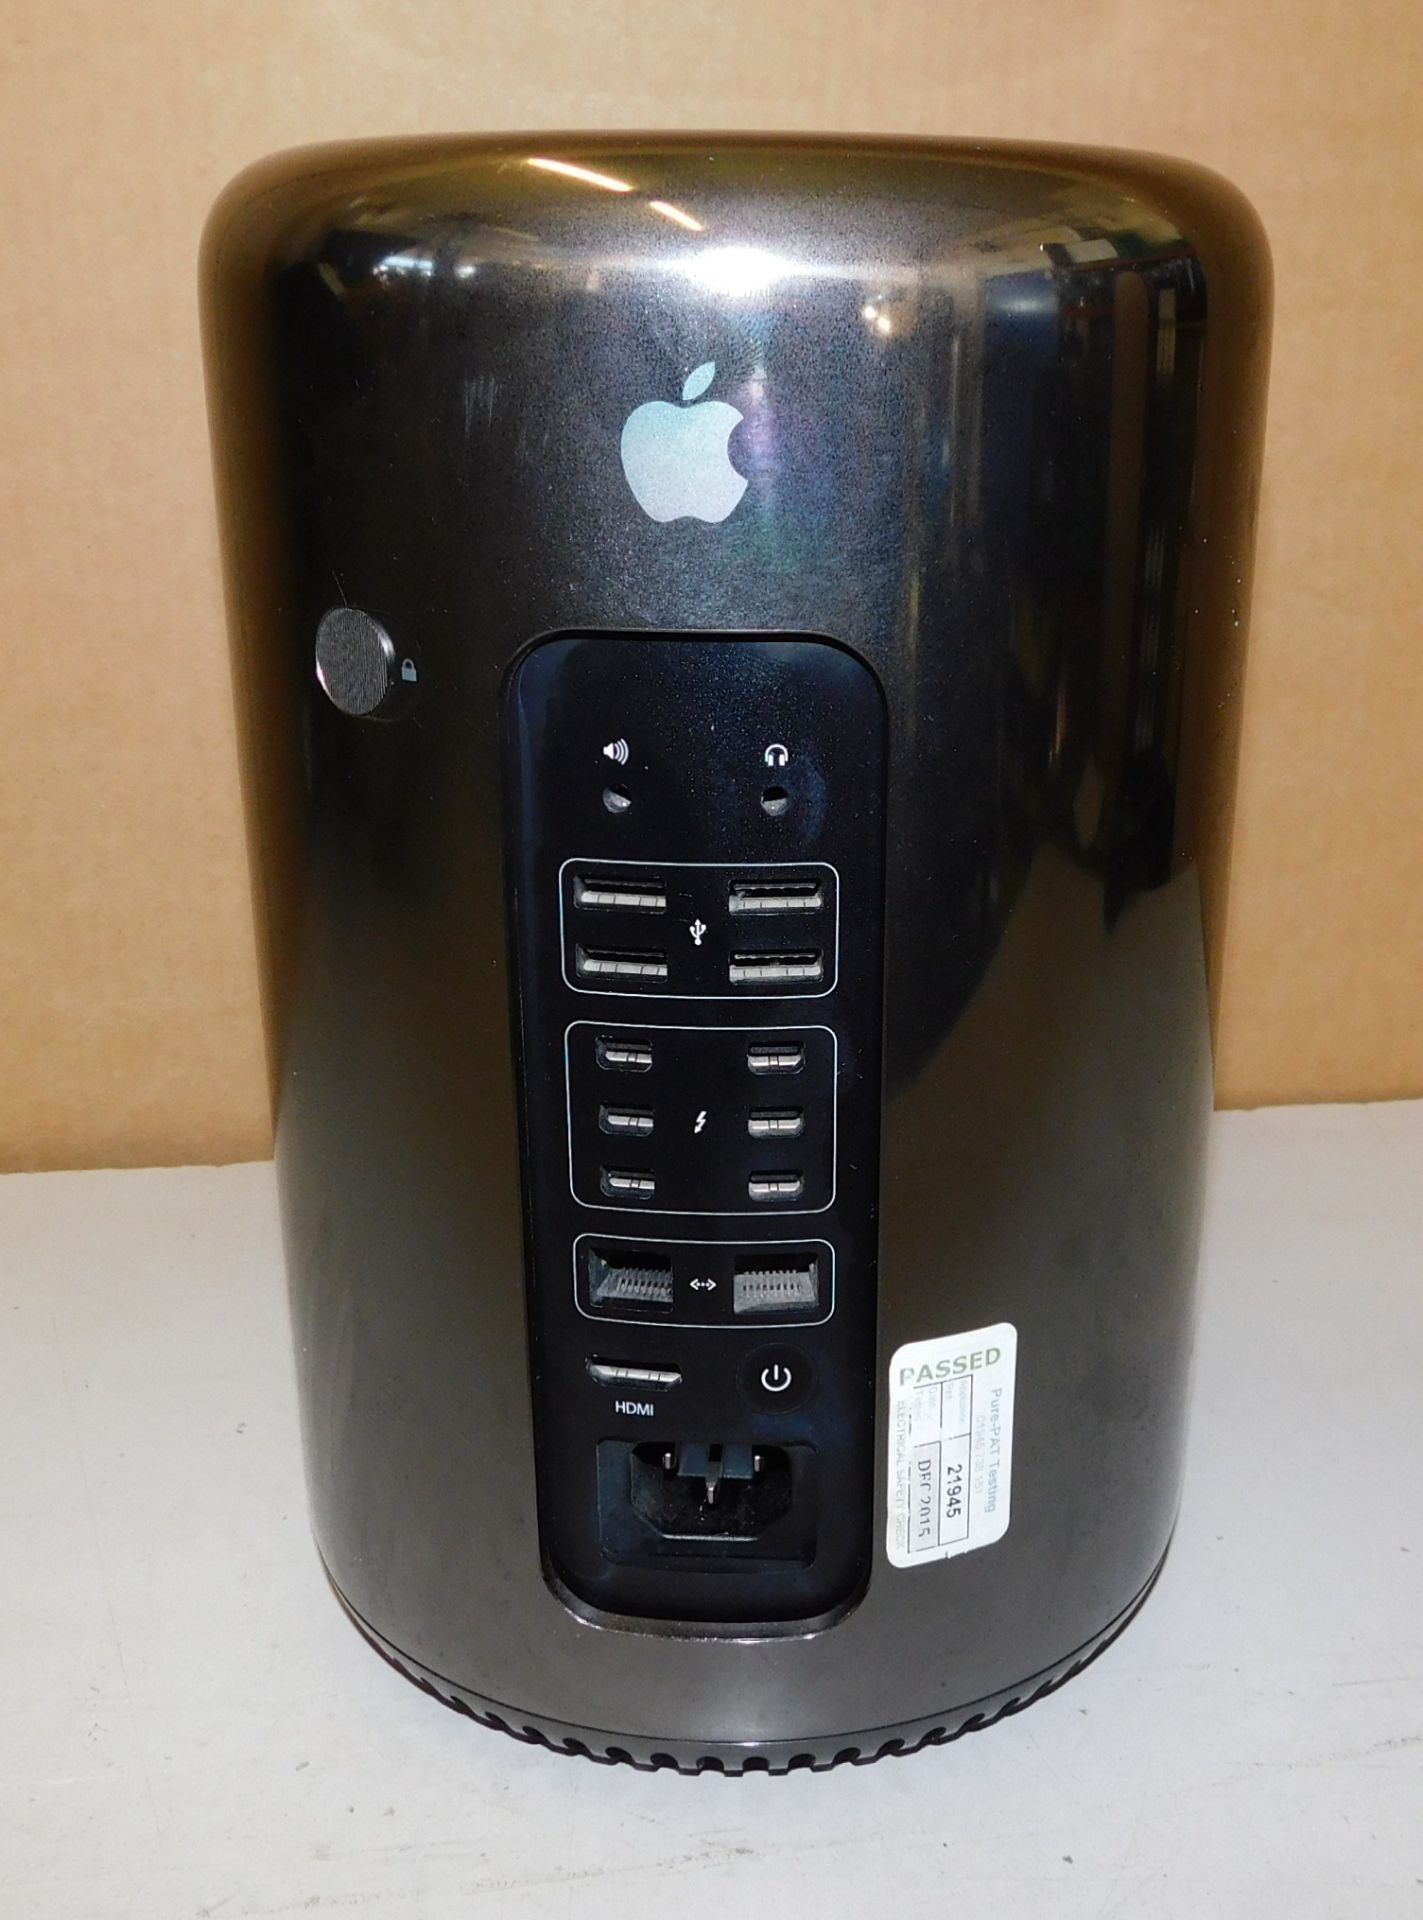 Apple Mac Pro “Dustbin”, Serial Number F5KMV0E1F9VM, No OS Installed (Location Stockport. Please - Image 2 of 4